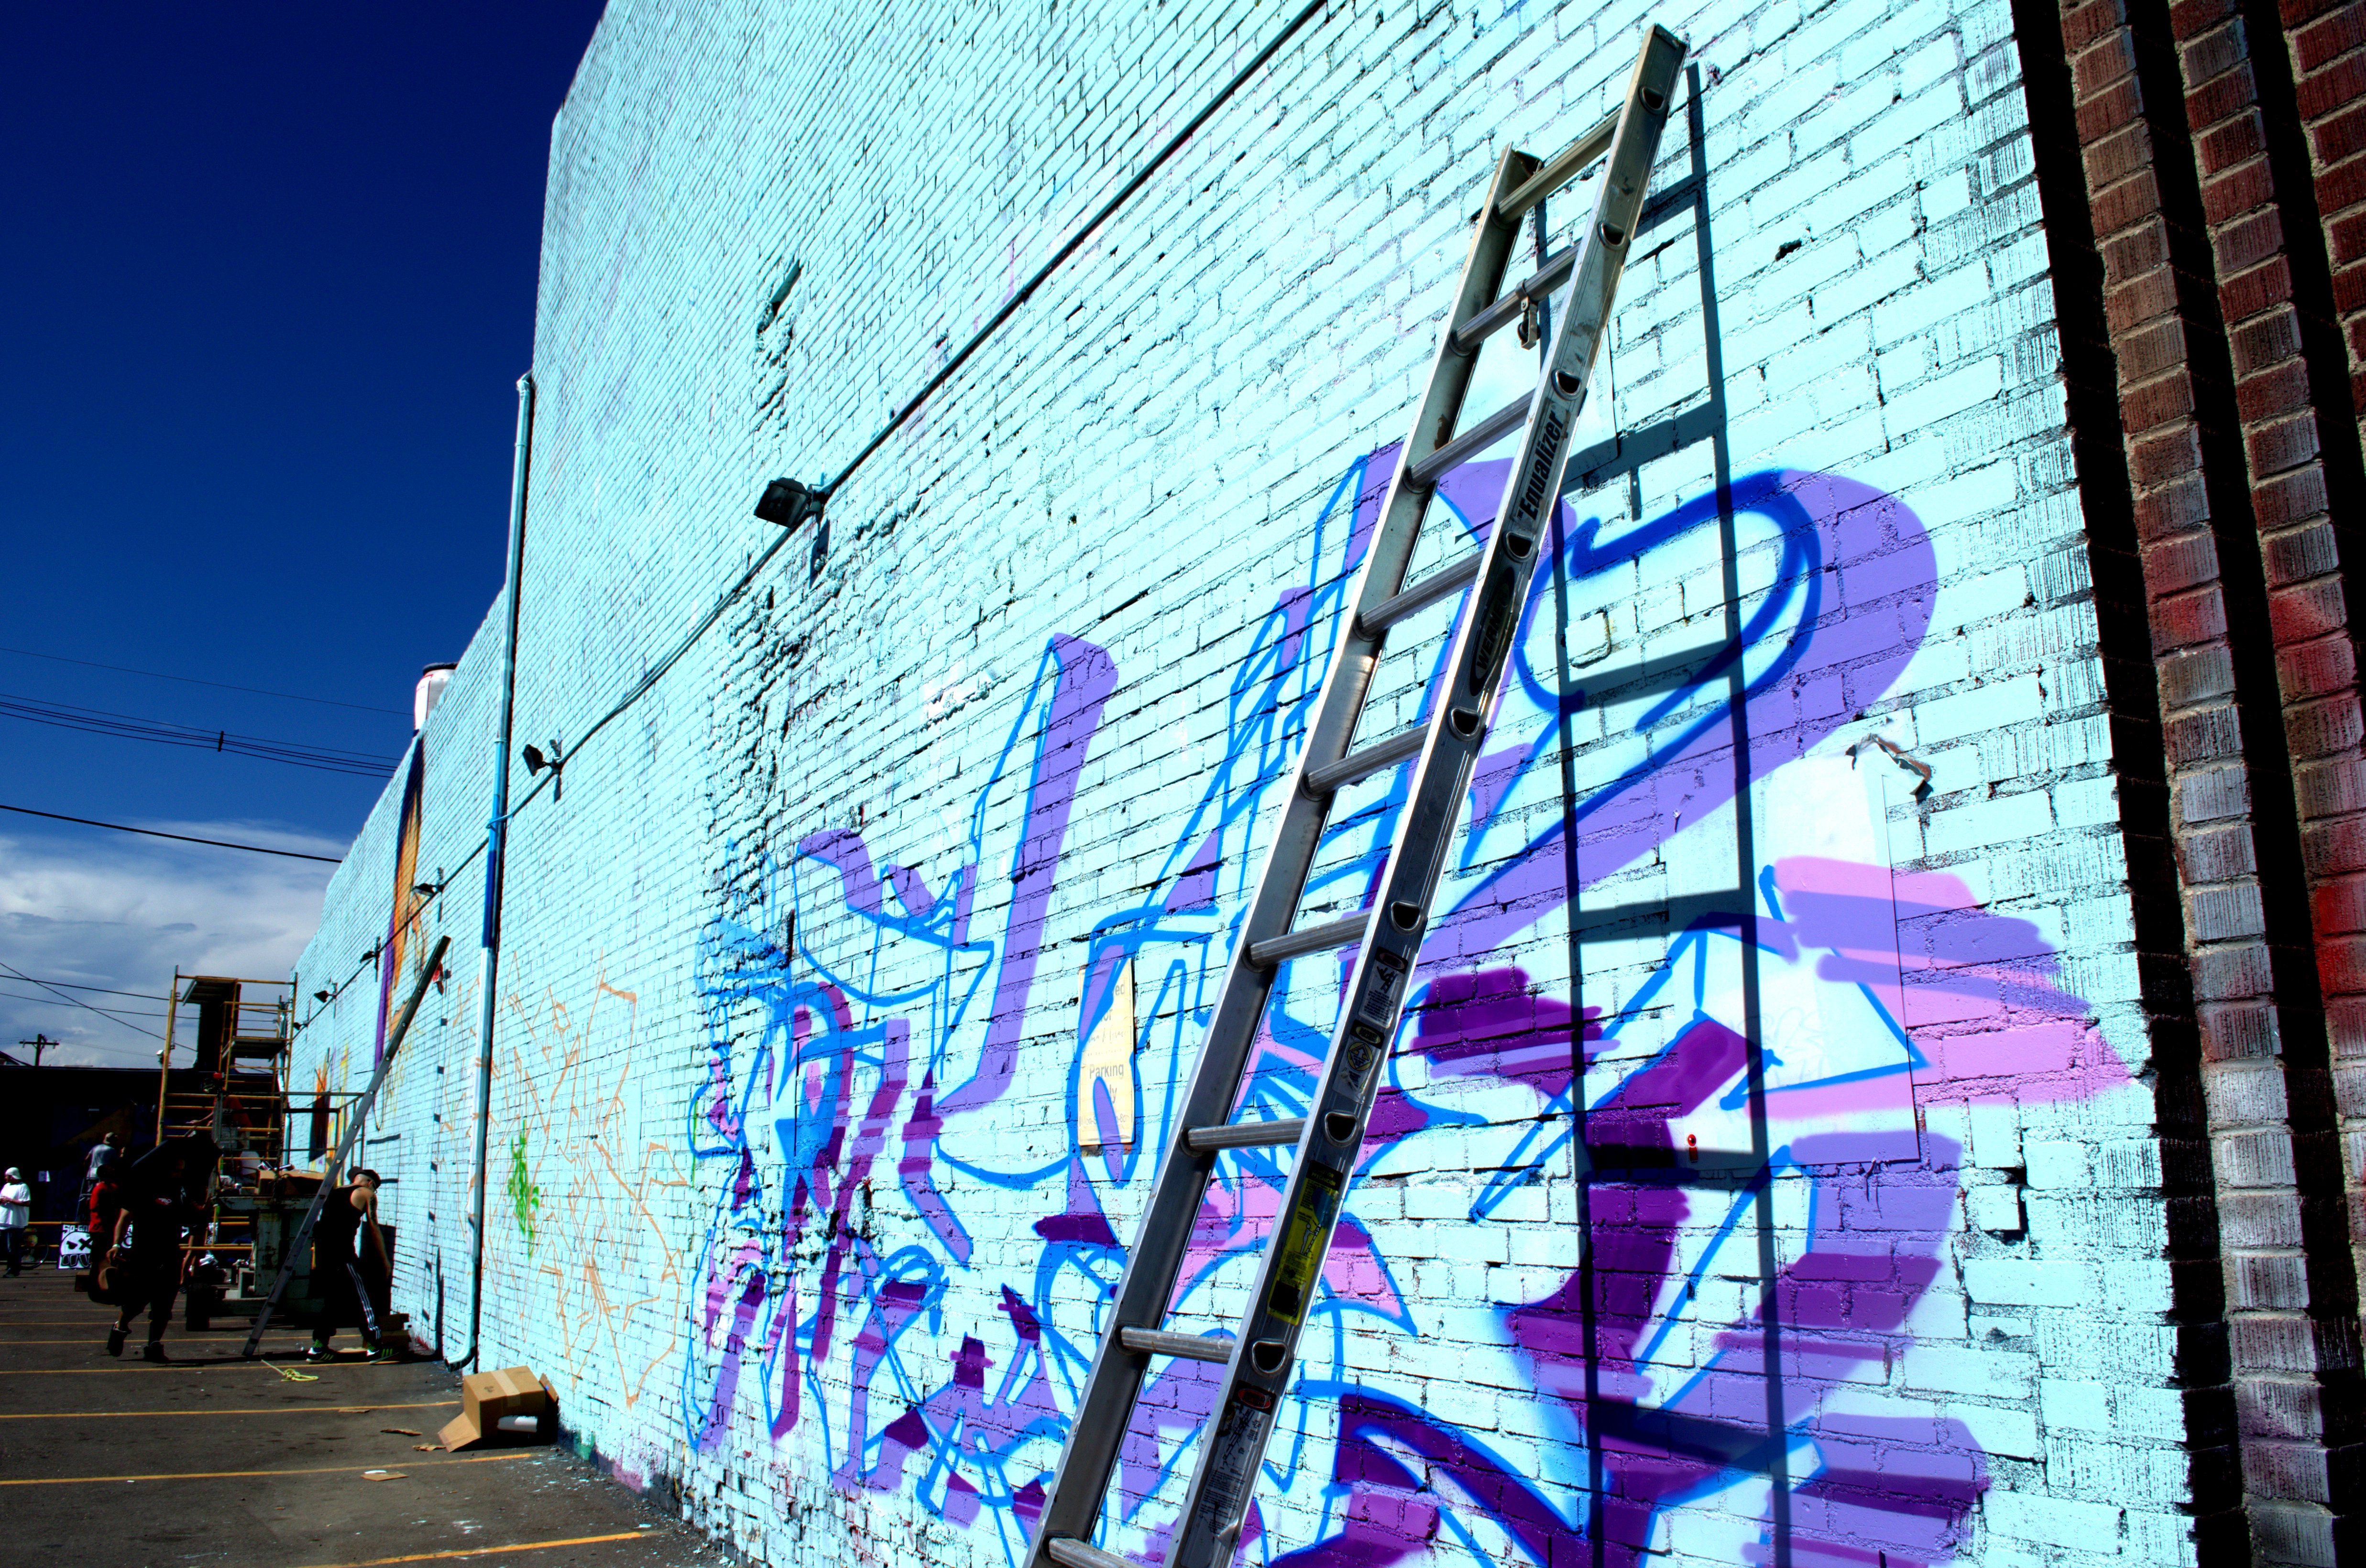 Colorado Crush 2013 mural by Tats Cru artists BG183 and Totem2 (from right to left)